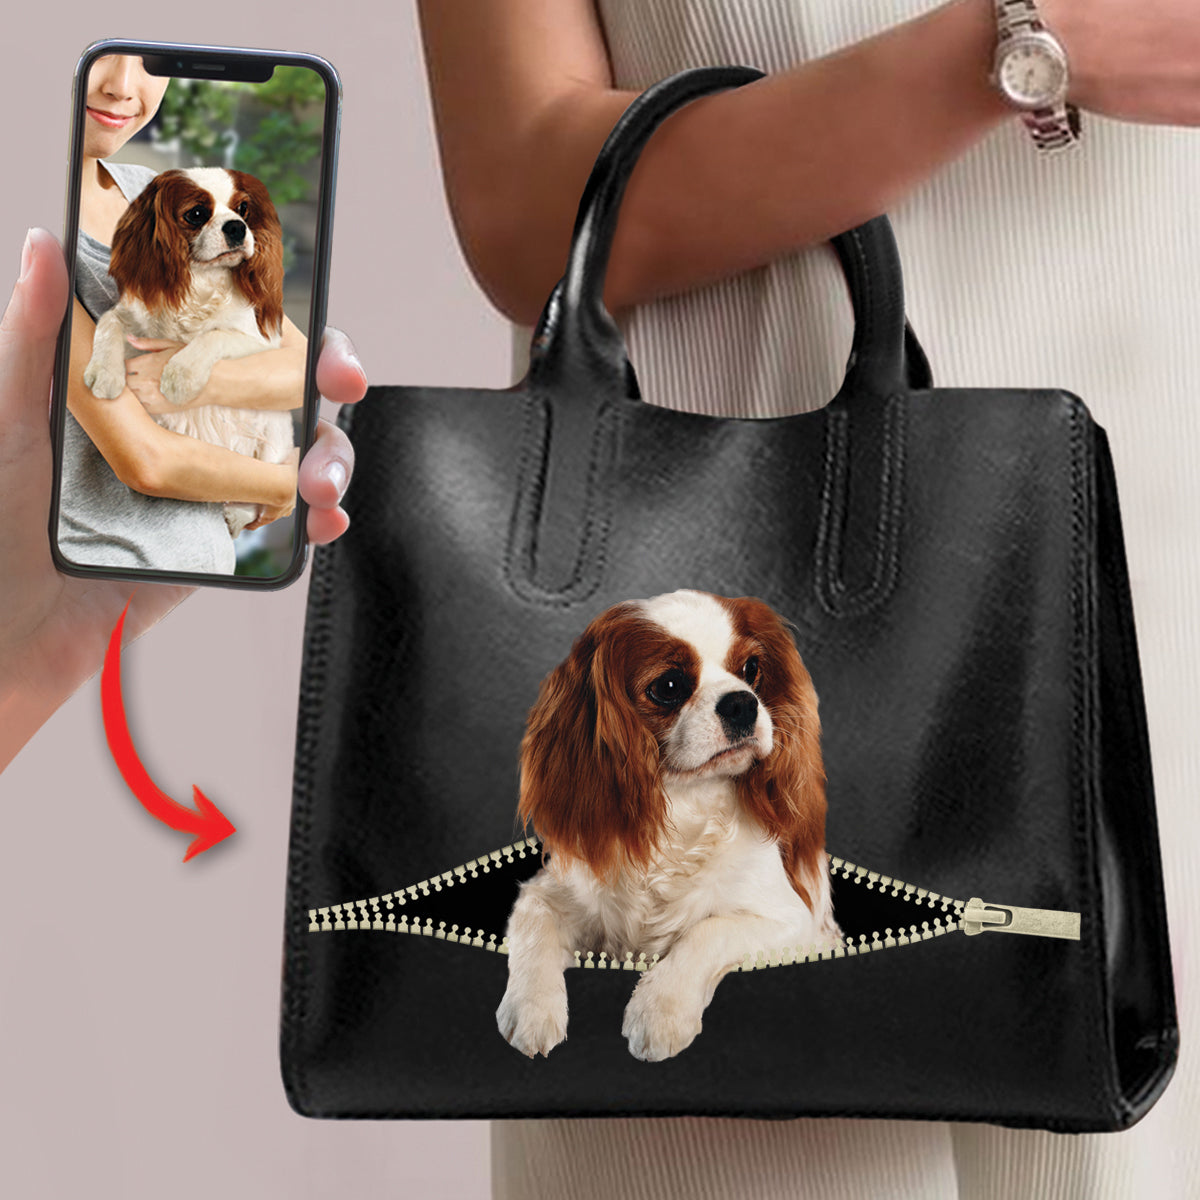 Love You - Personalized Luxury Handbag With Your Pet's Photo V1